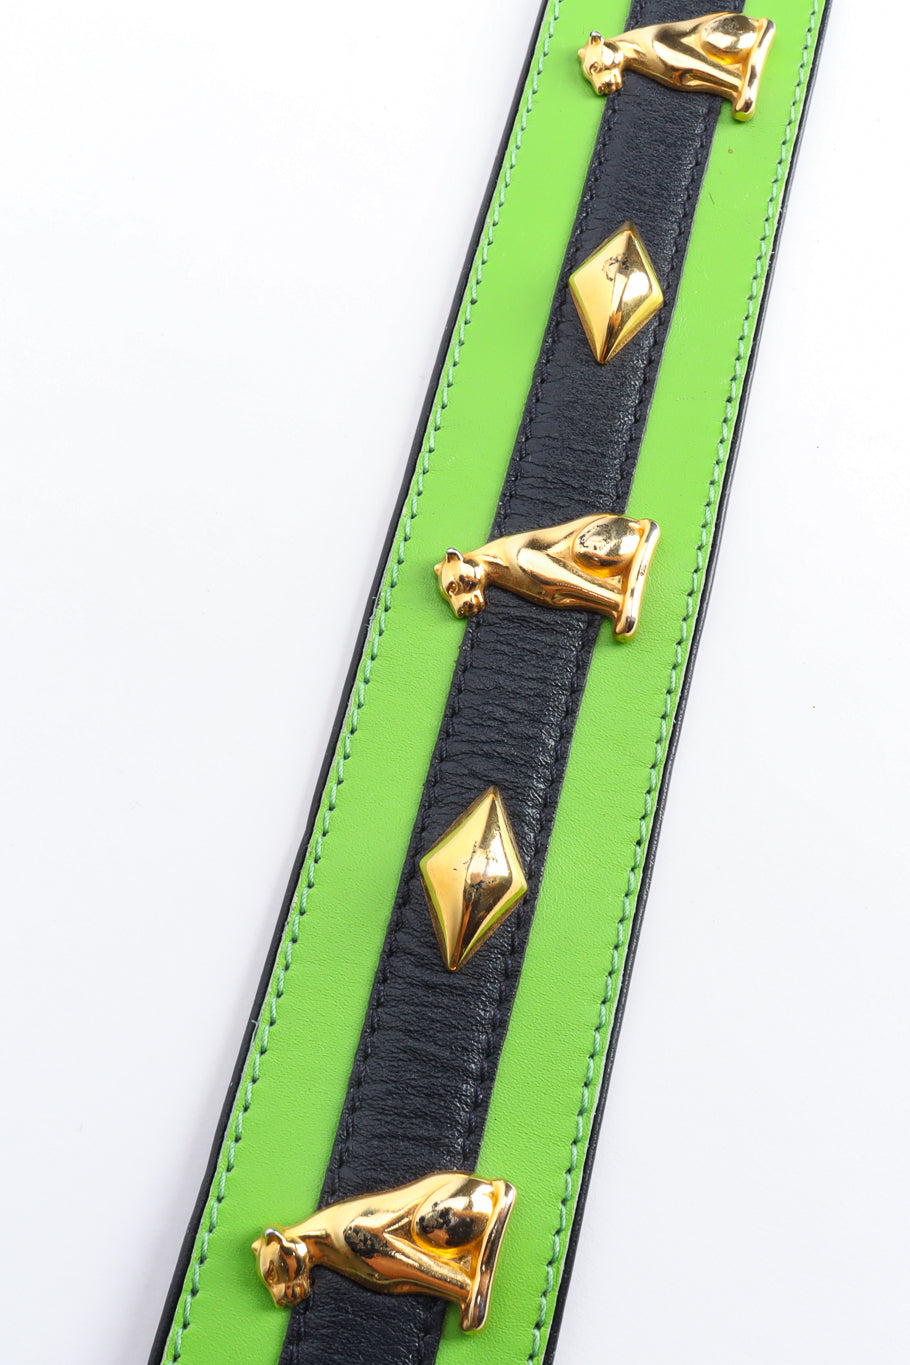 panther studded leather belt by Escada stud scuffs @recessla